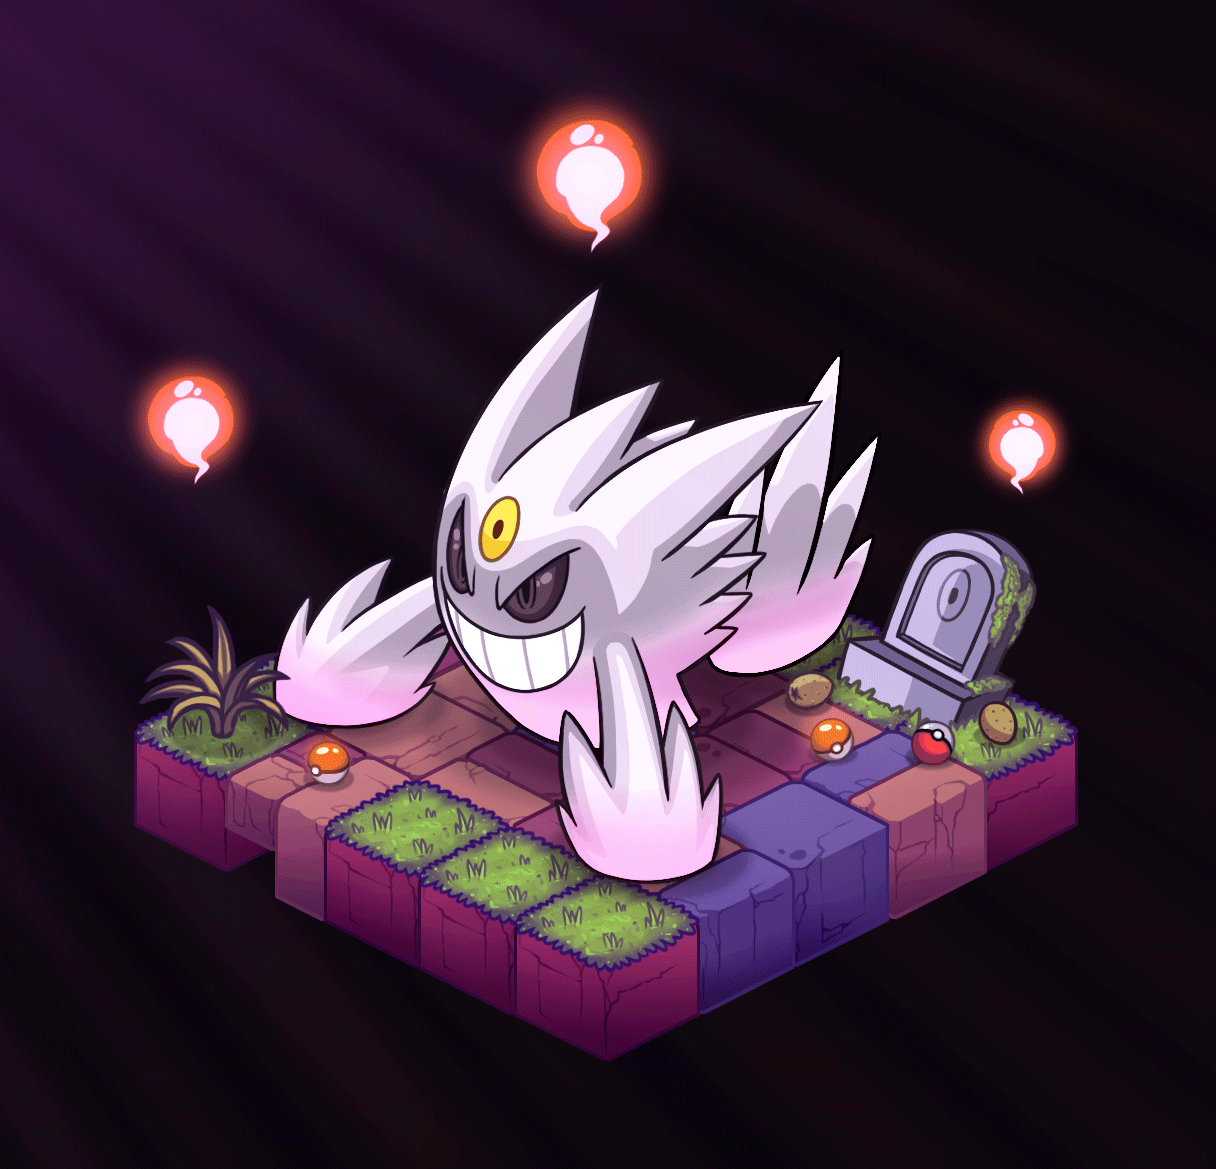 My shiny Gengar is prepared to be megaevolved, and yours? me at instagram as elemental_drawings